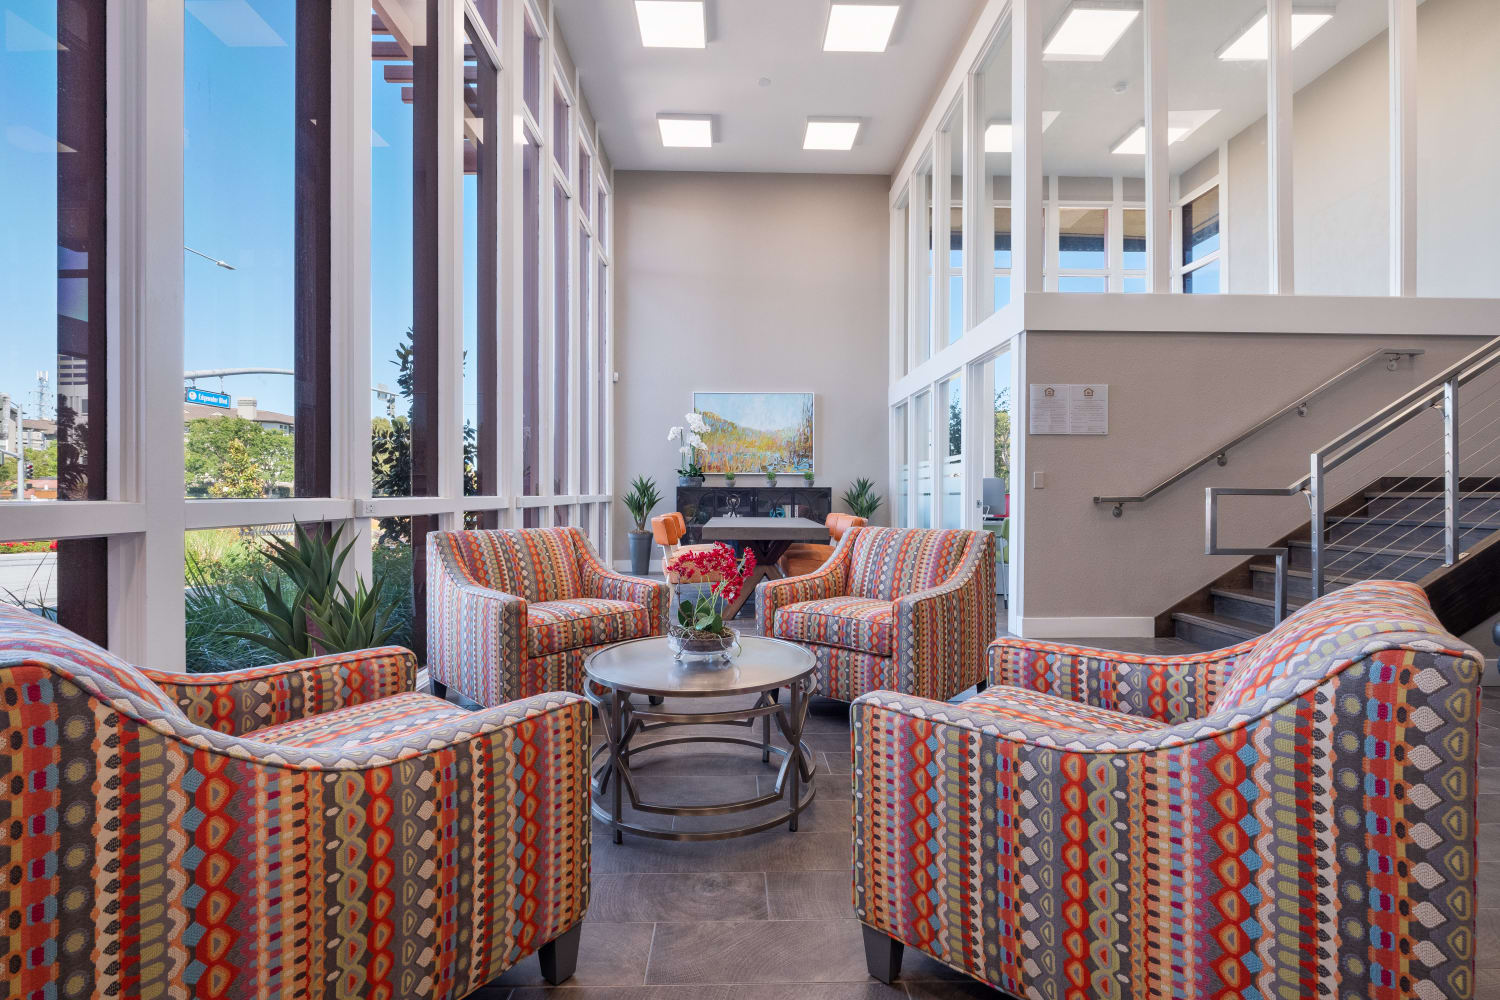 Comfy seating area with a view at Harbor Cove Apartments in Foster City, California